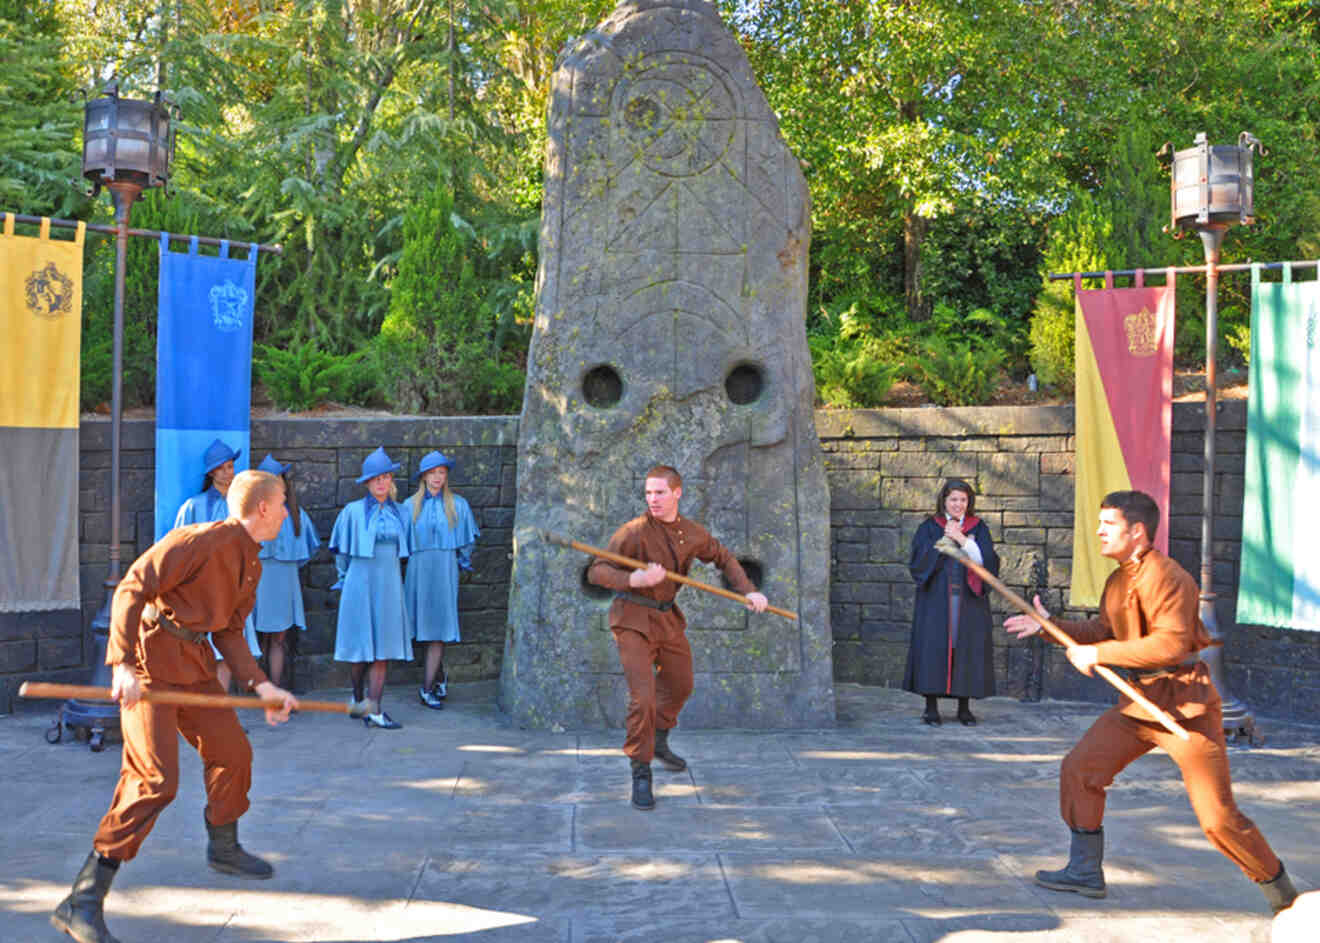 People dressed as wizards performing a show